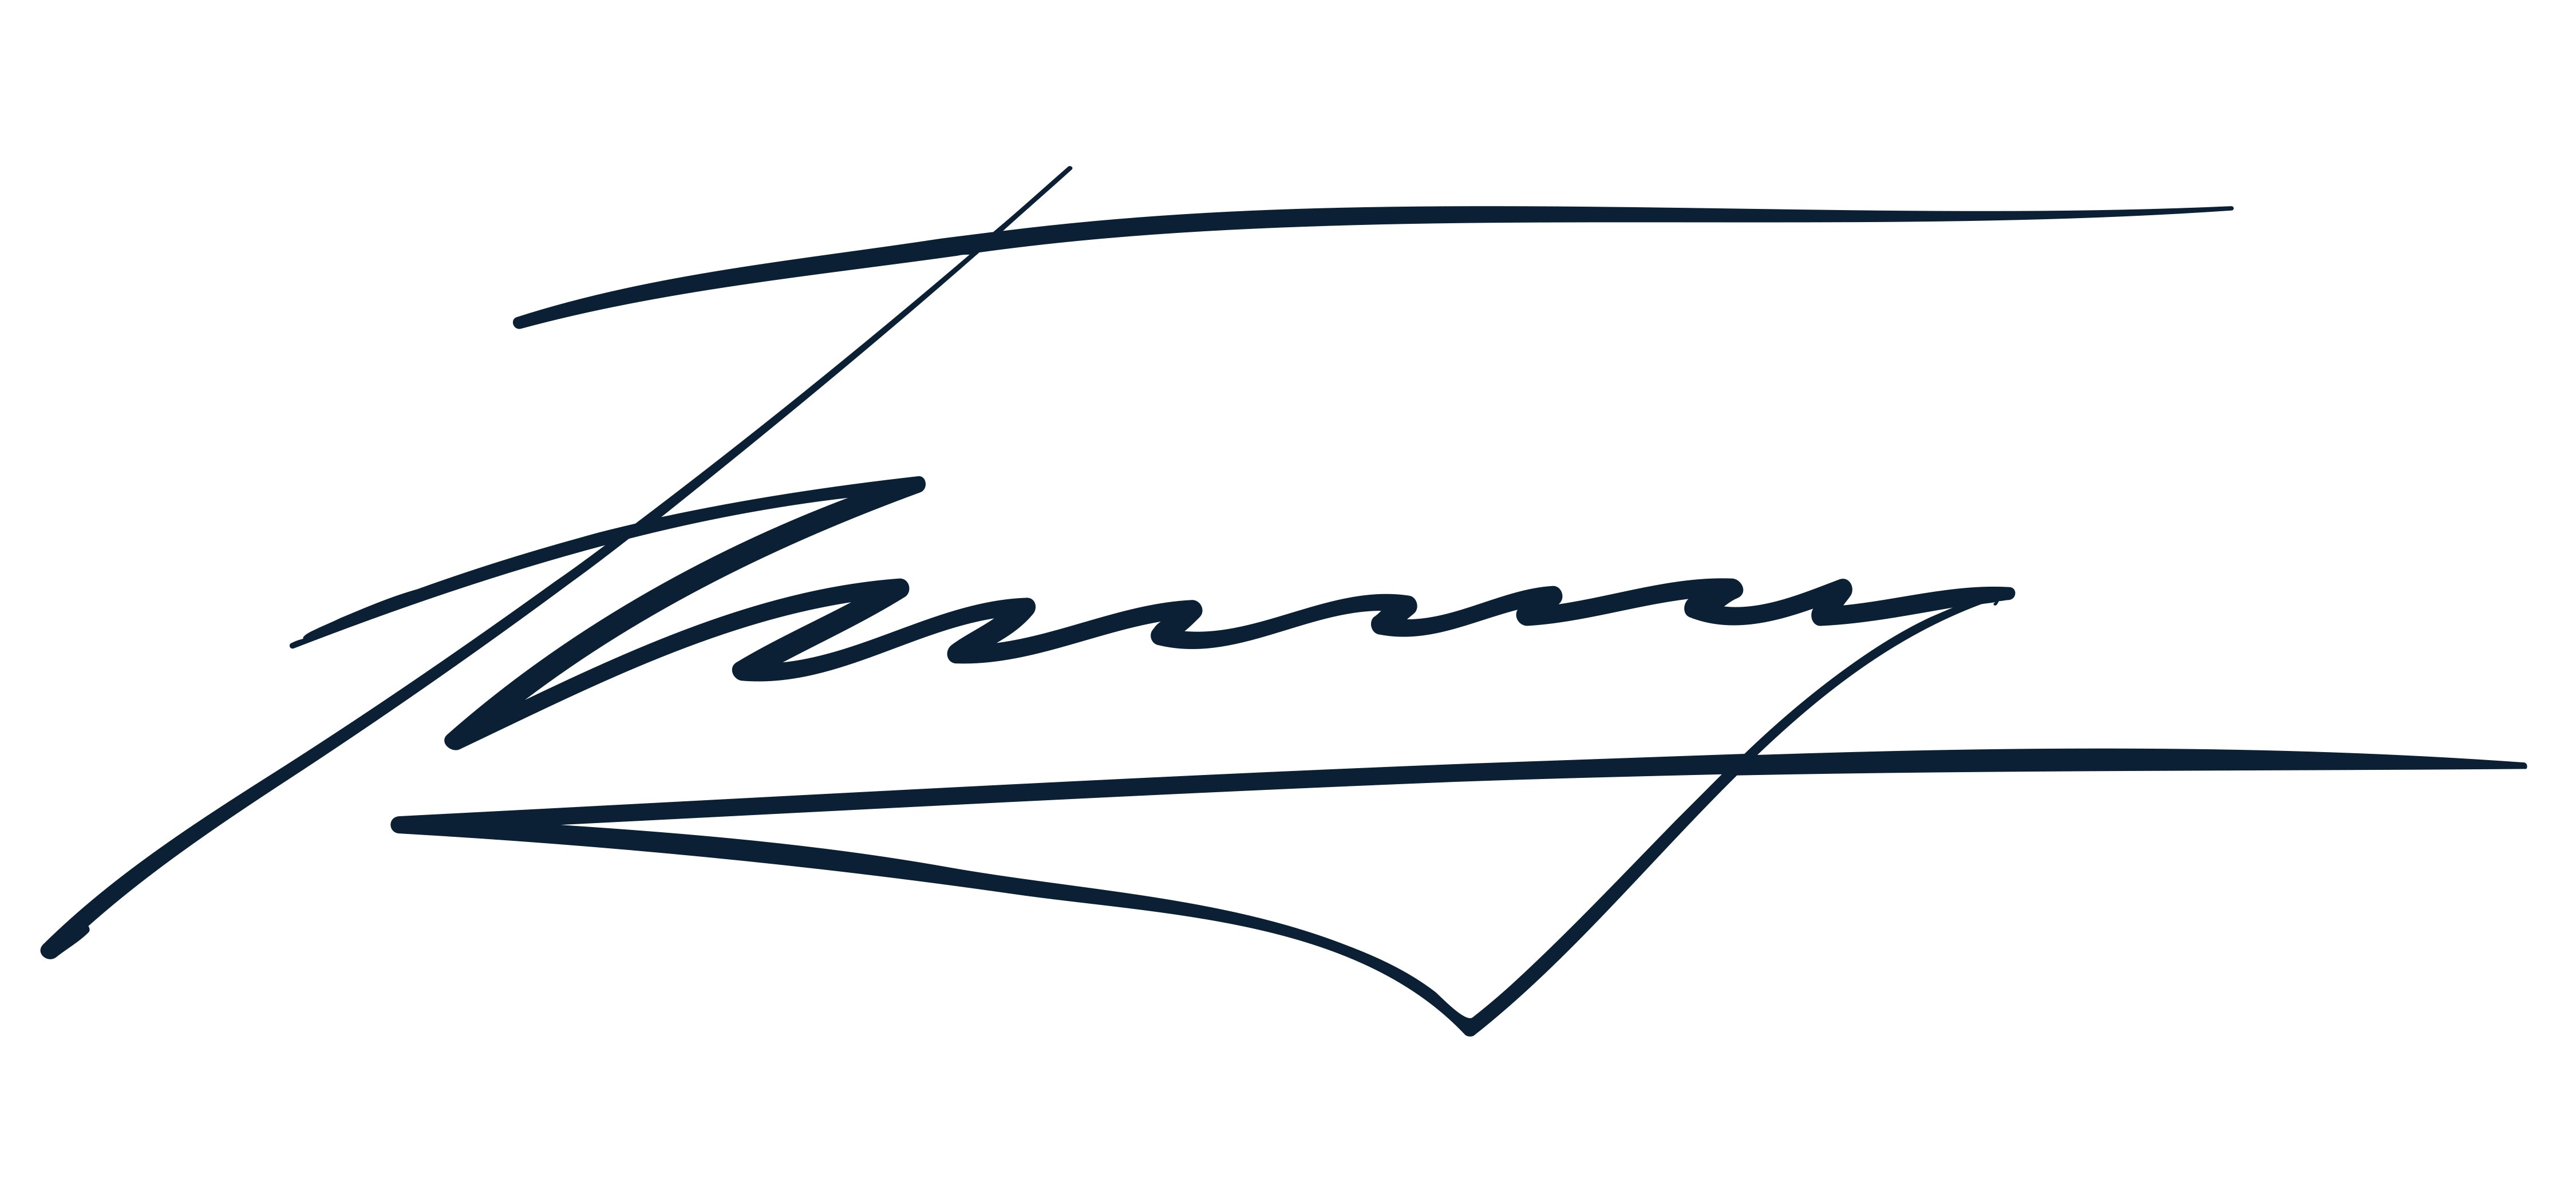 There are many studies about signatures, and many are very insightful. Experts say that having your signature underlined can mean that you need to be recognized and feel important. Others say that it shows confidence, perhaps because you’re emphasizing your name by using an underline. 